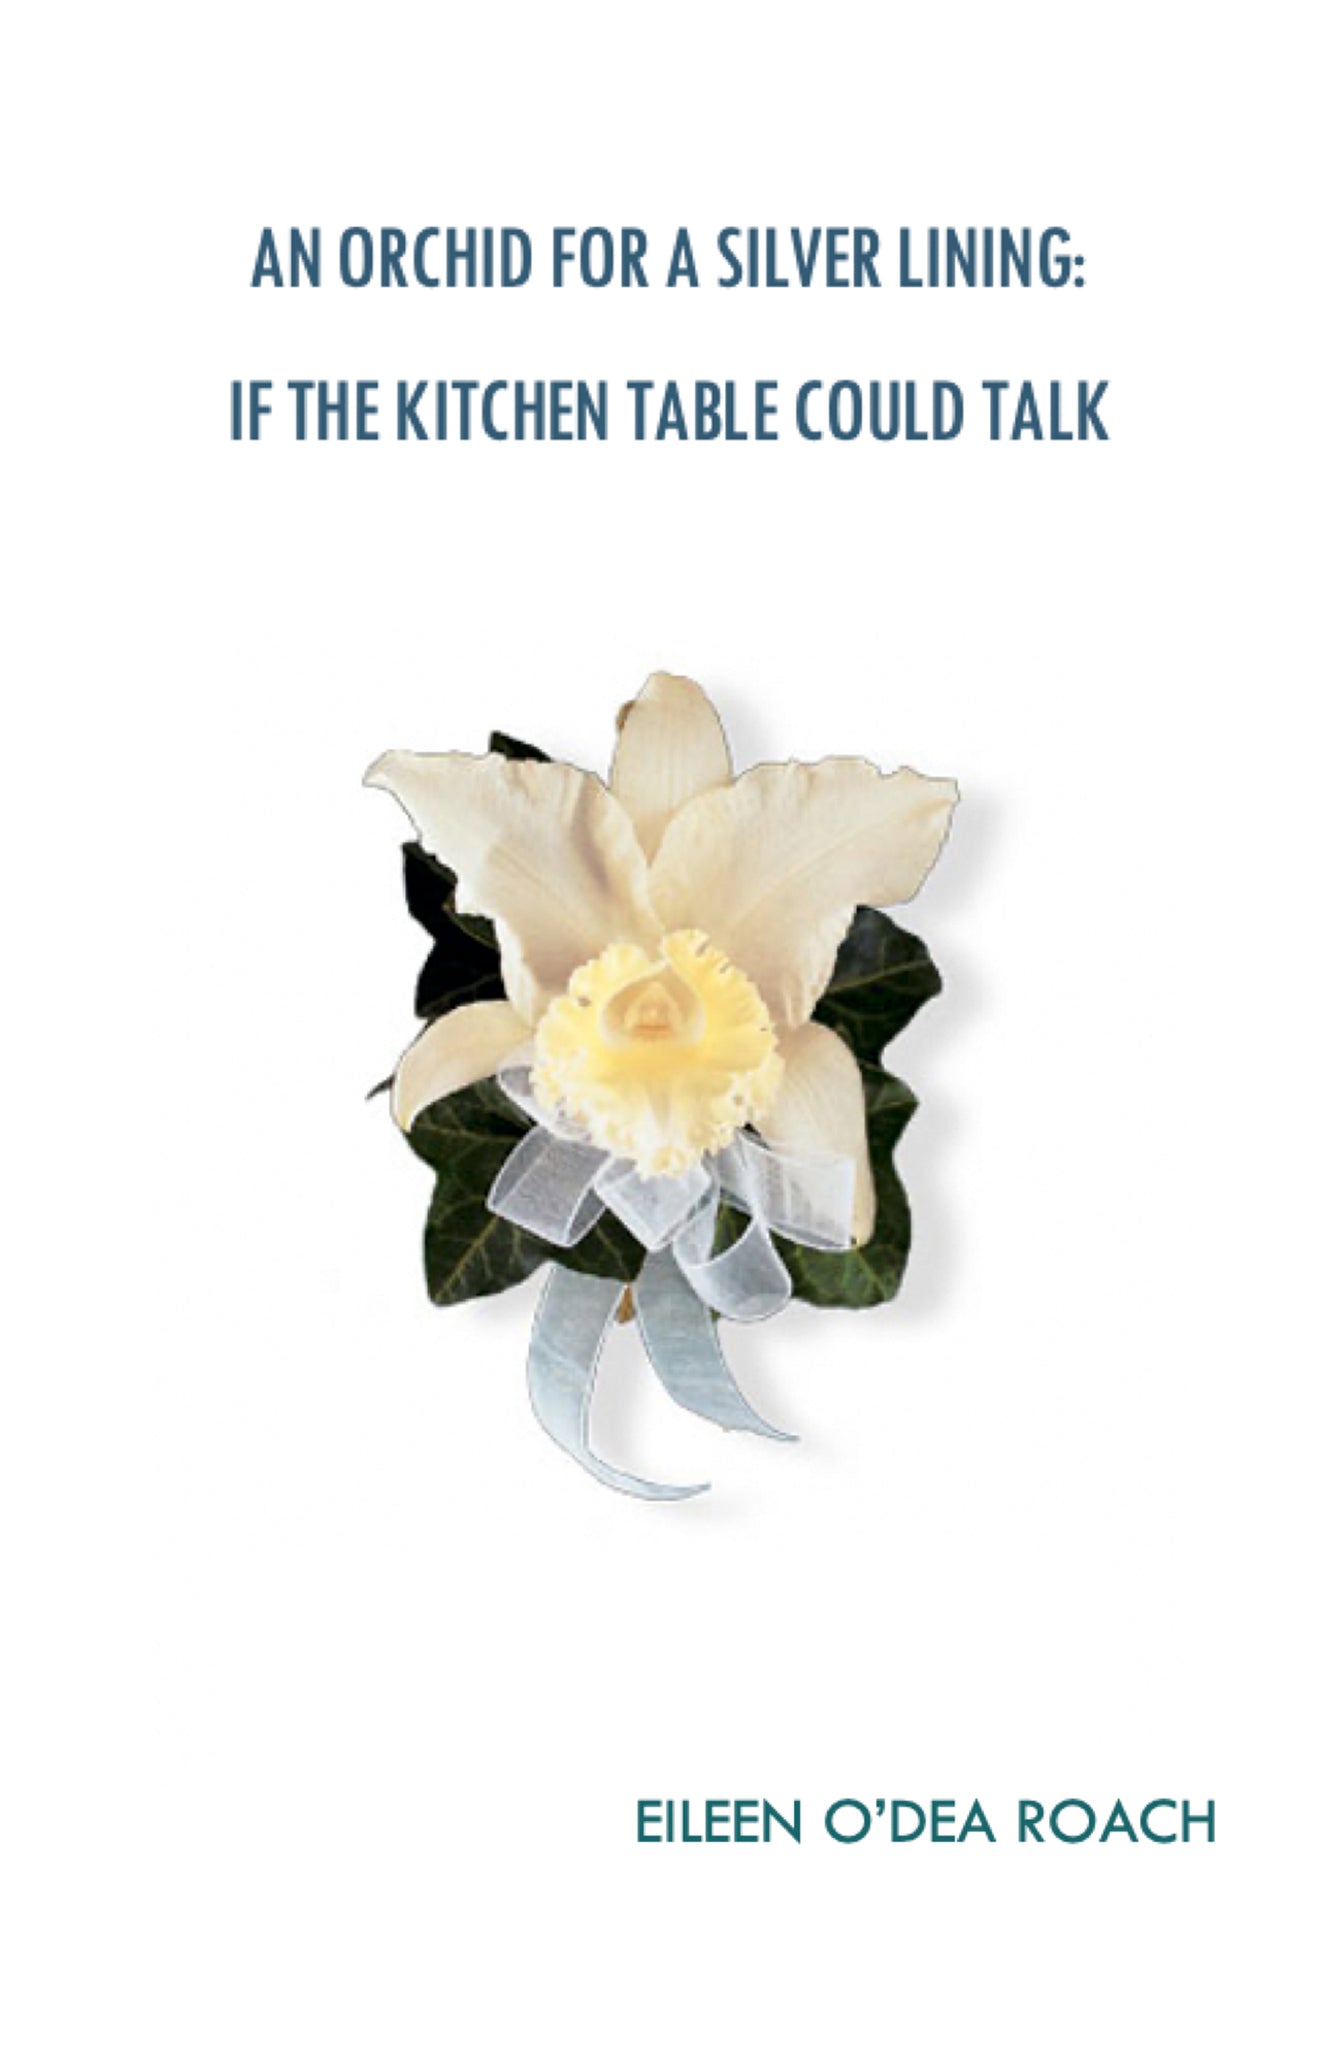 An Orchid for a Silver Lining: If the Kitchen Table Could Talk